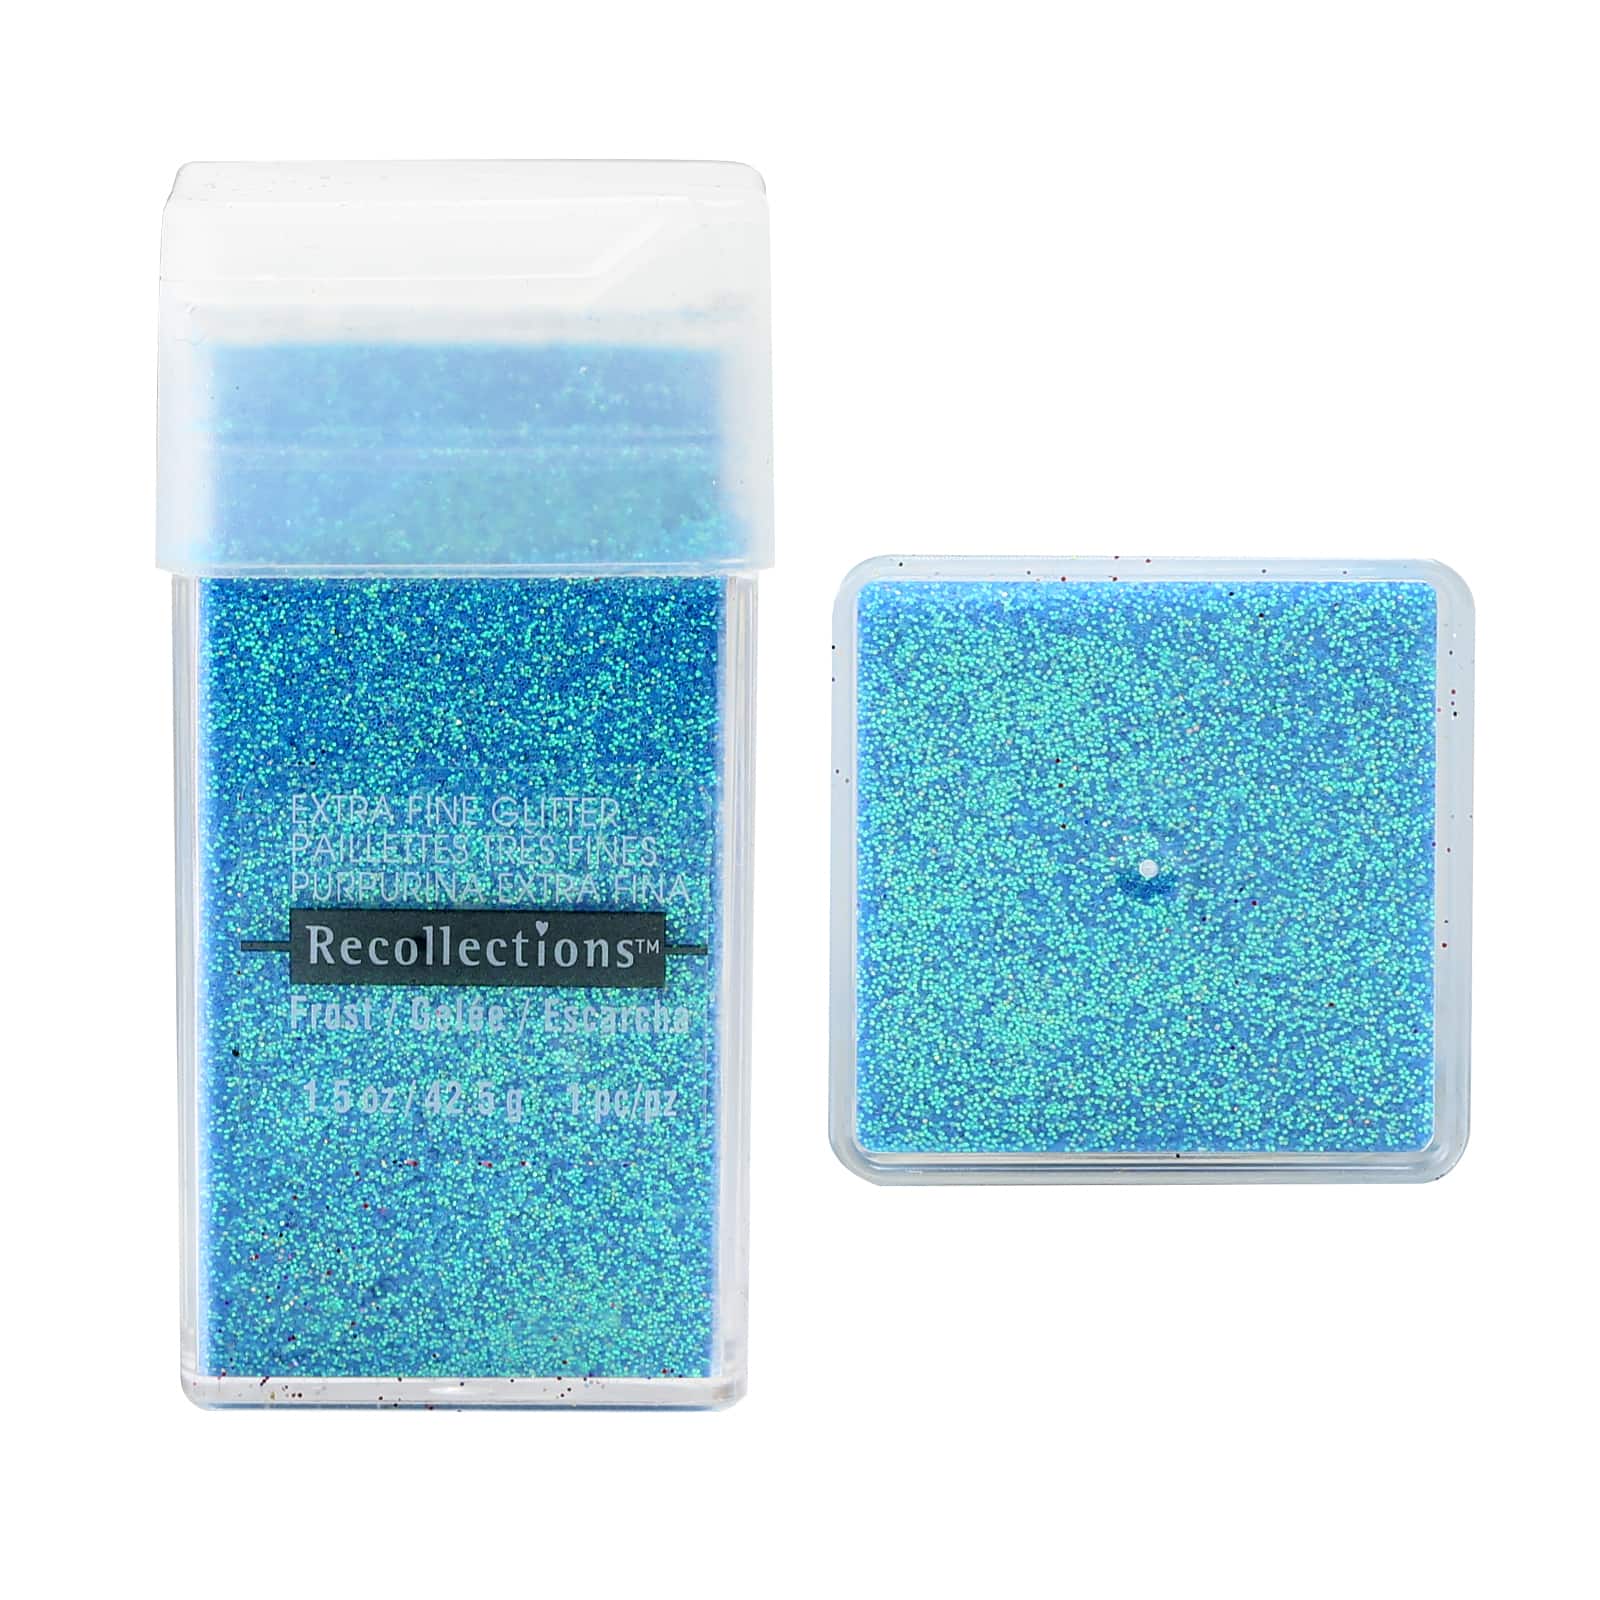 Extra Fine Glitter by Recollections™, 1.5oz.